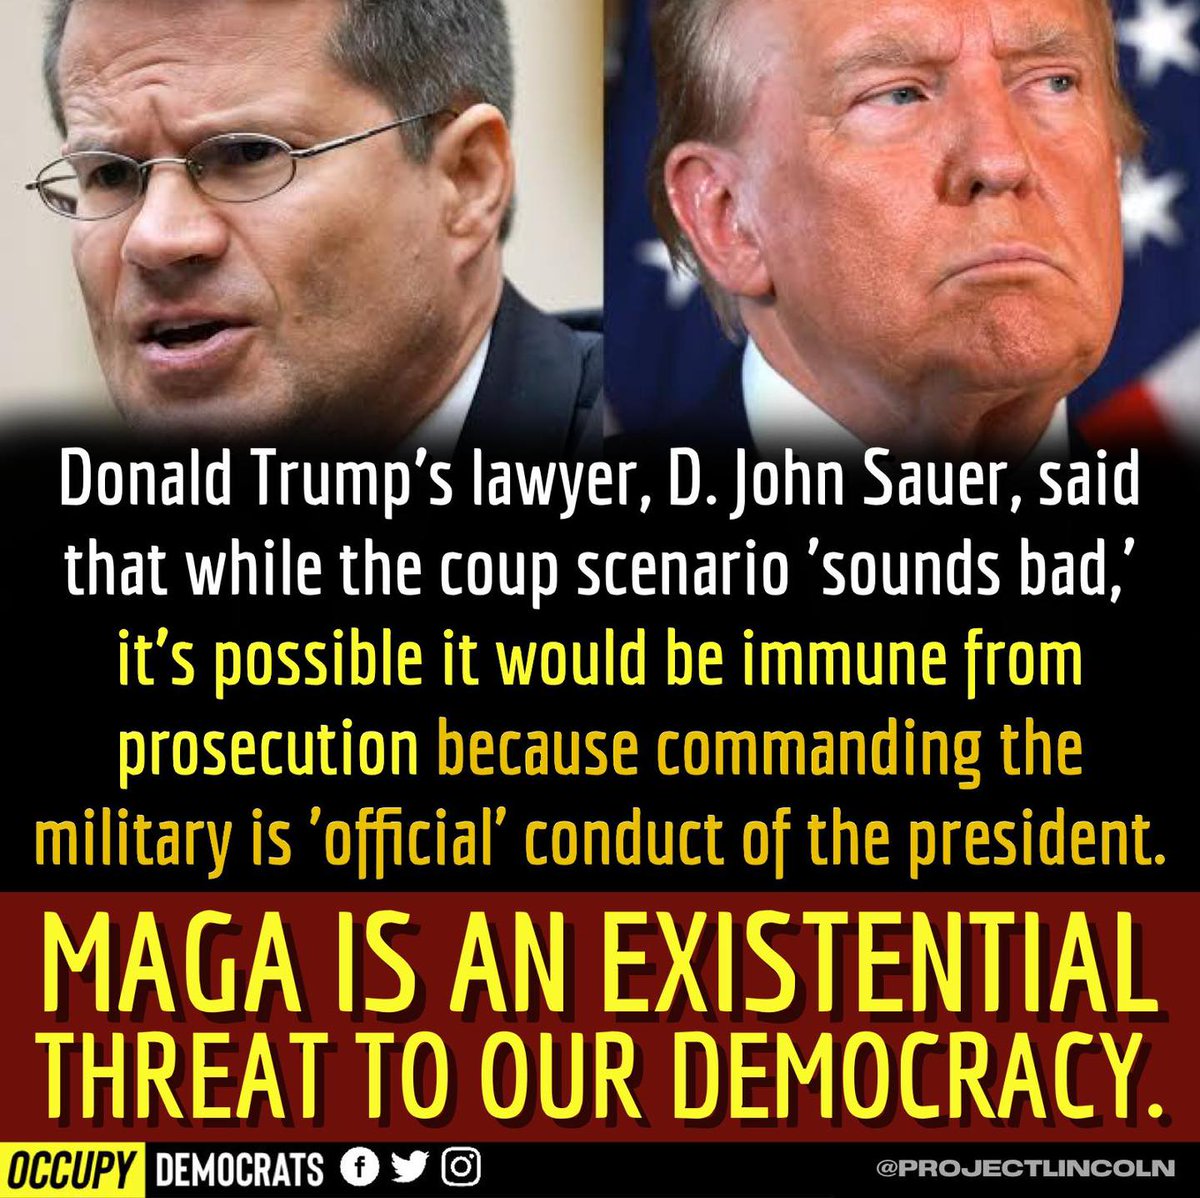 Trump toady Bill Barr jumps the shark
Ex-AG says Biden bigger threat to Democracy than Trump
Barr’s joins #Cult45
Trump = dictator
MAGA most serious threat in US history
It must be stopped or there’s no going back
#ProudBlue #DemVoice1 #Fresh #DemsUnited 
cnn.com/2024/04/26/pol…